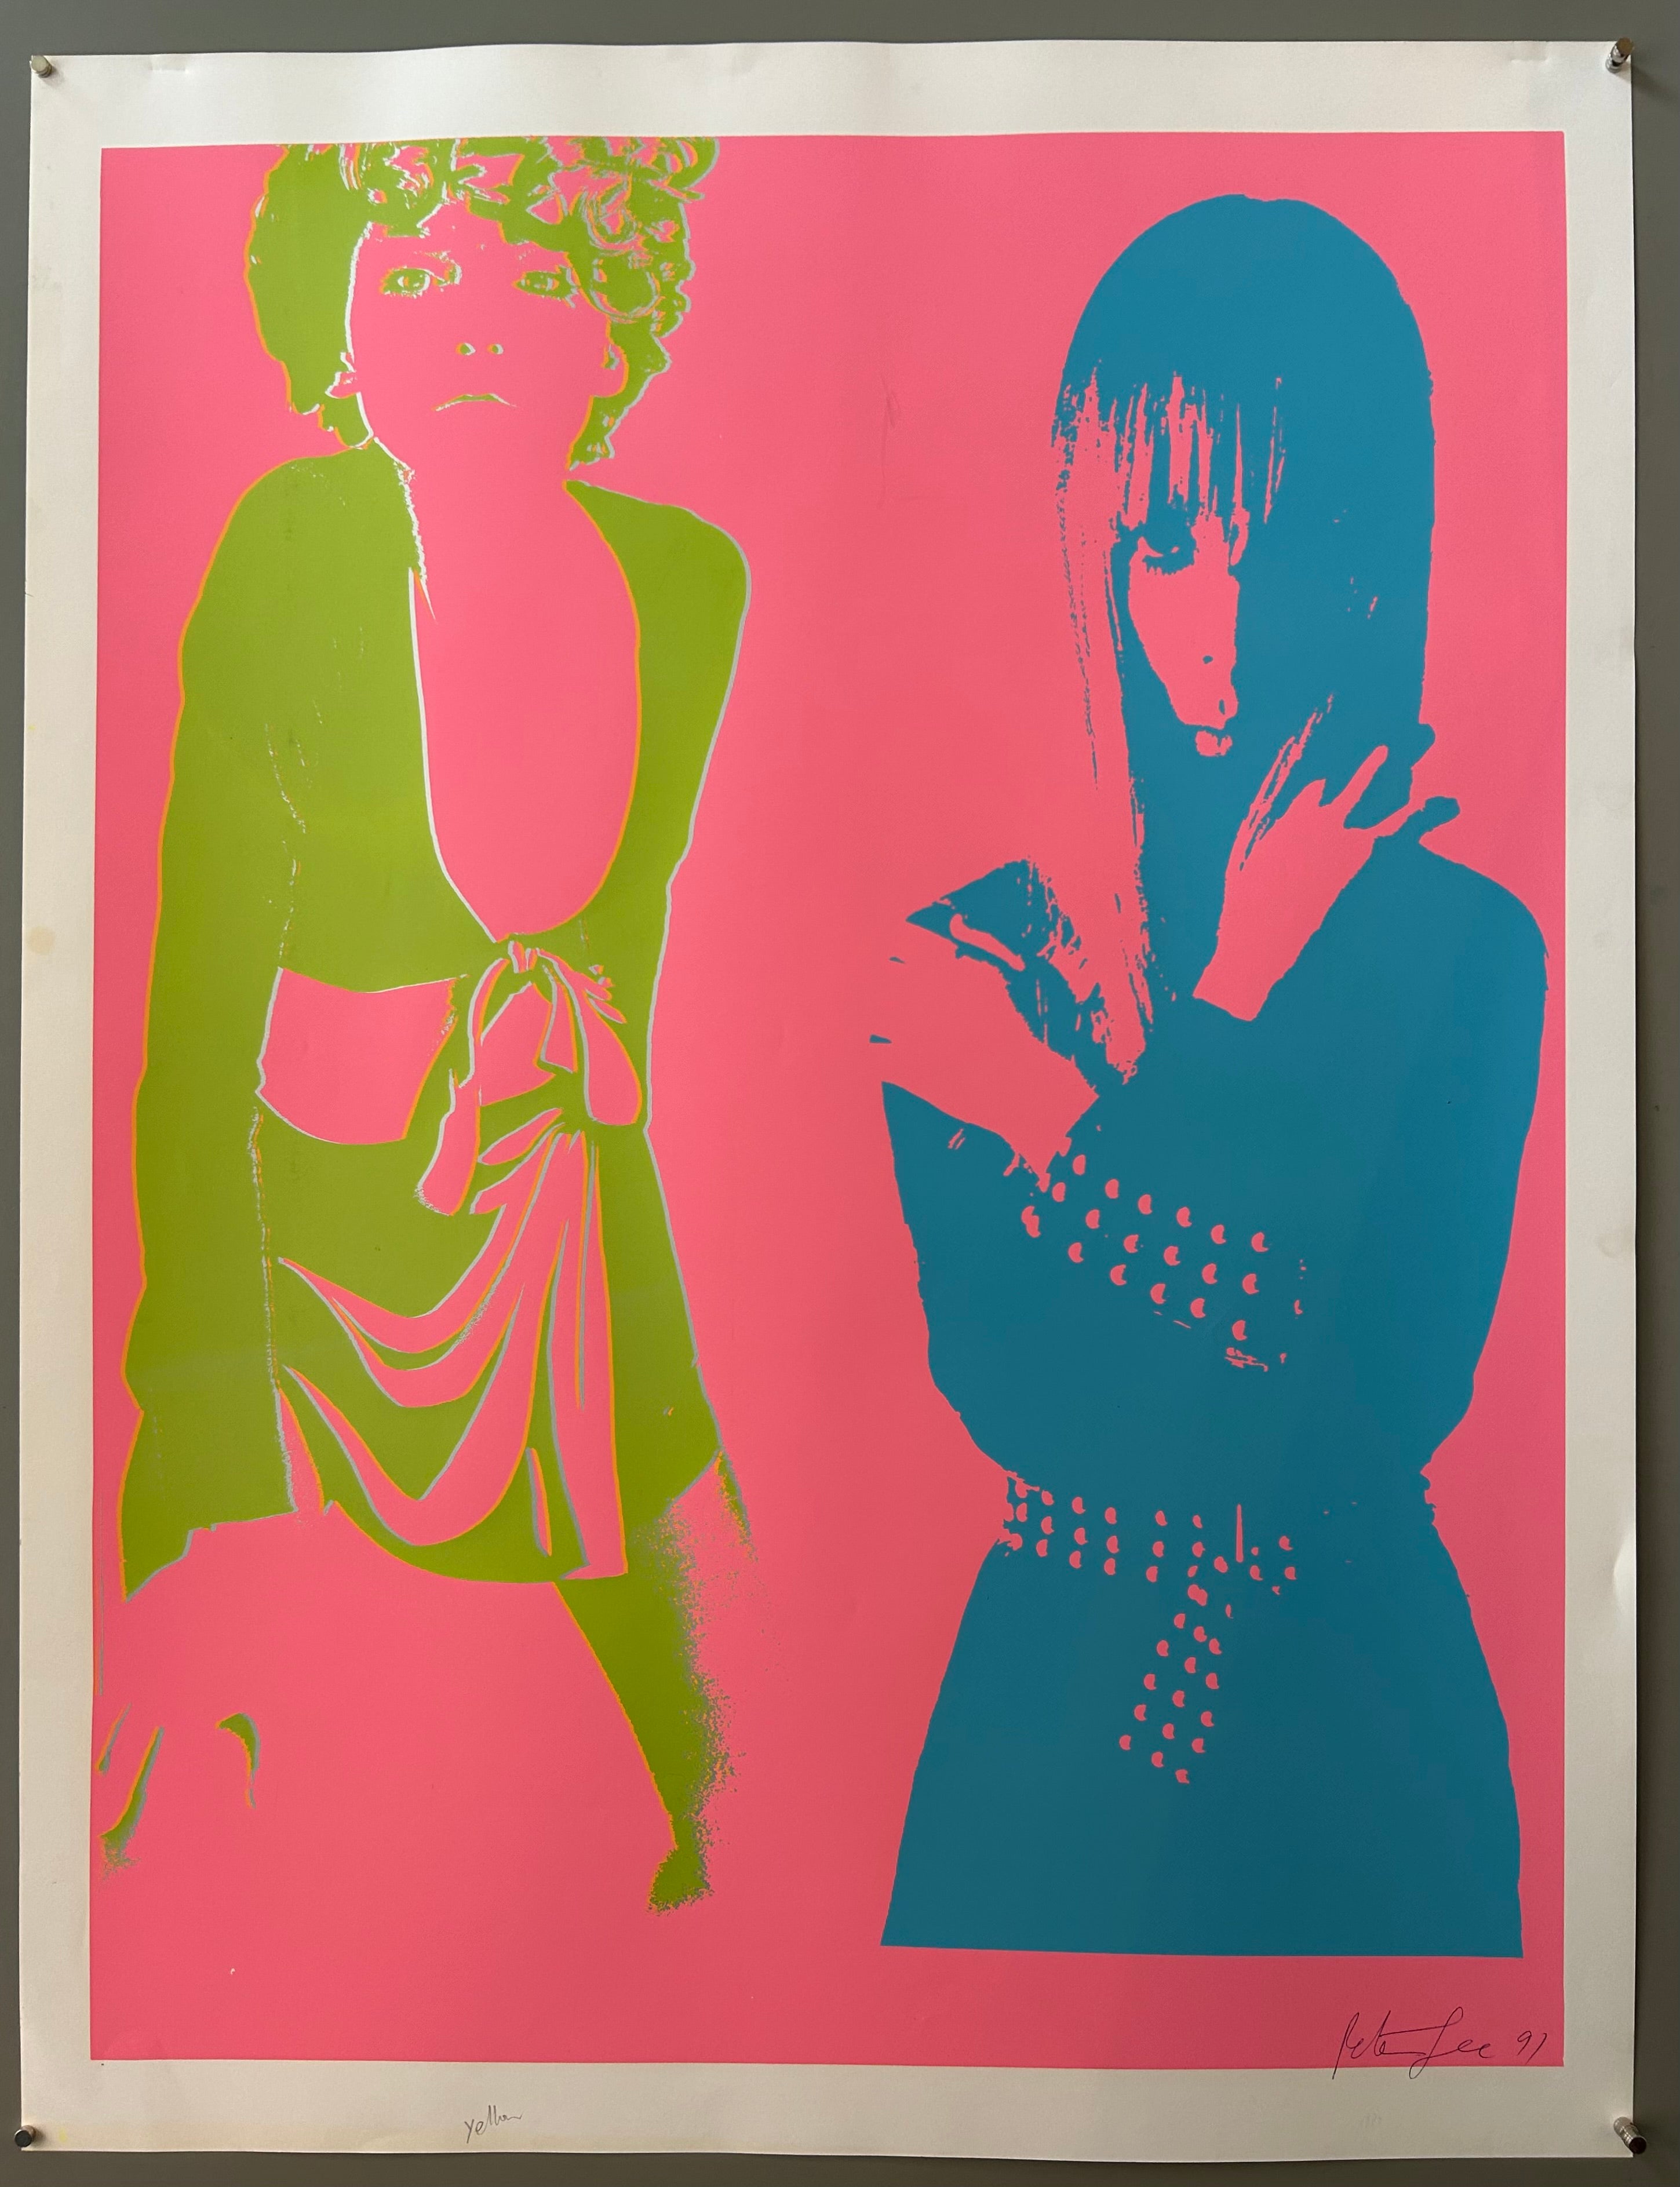 Two pop-art style images of women are side by side, with a pink background. The women are in green and blue.